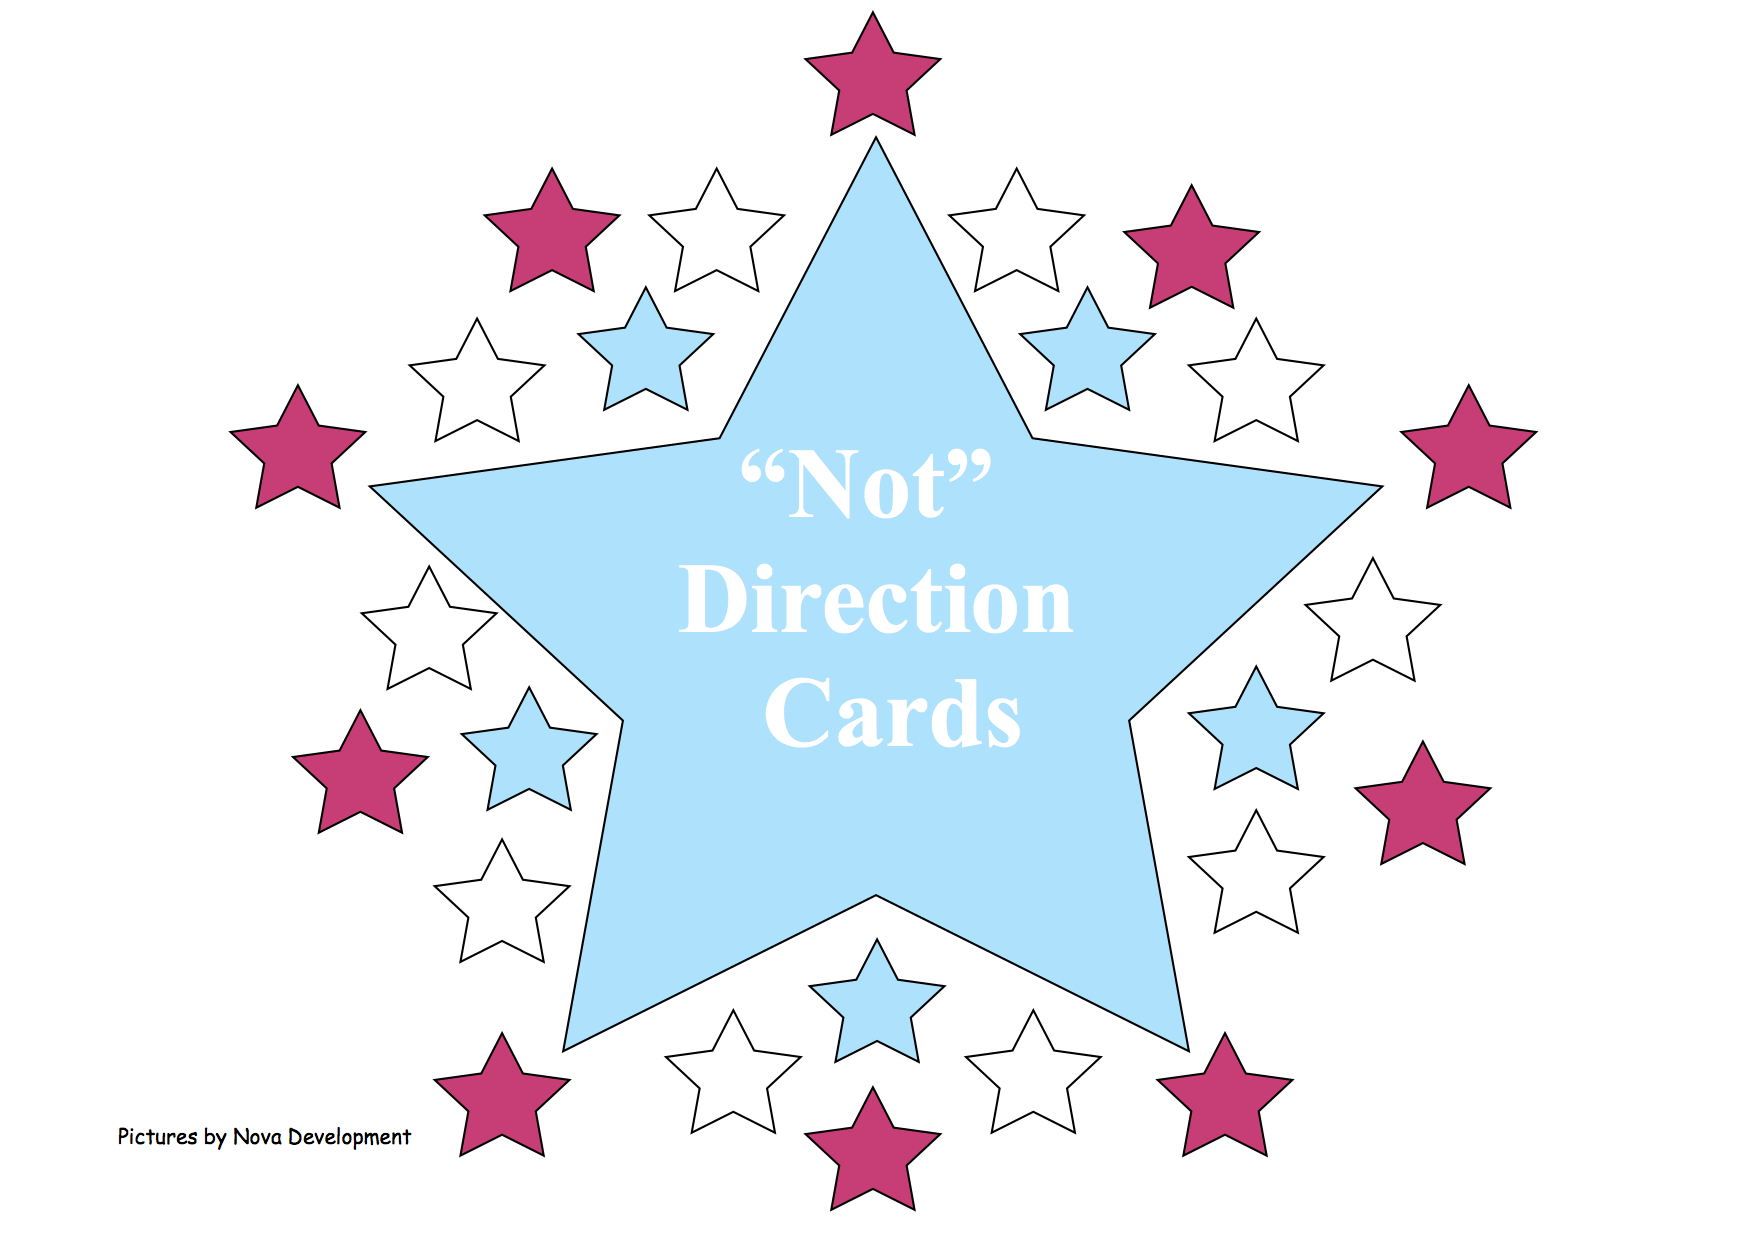 'Not' - Following Direction Cards